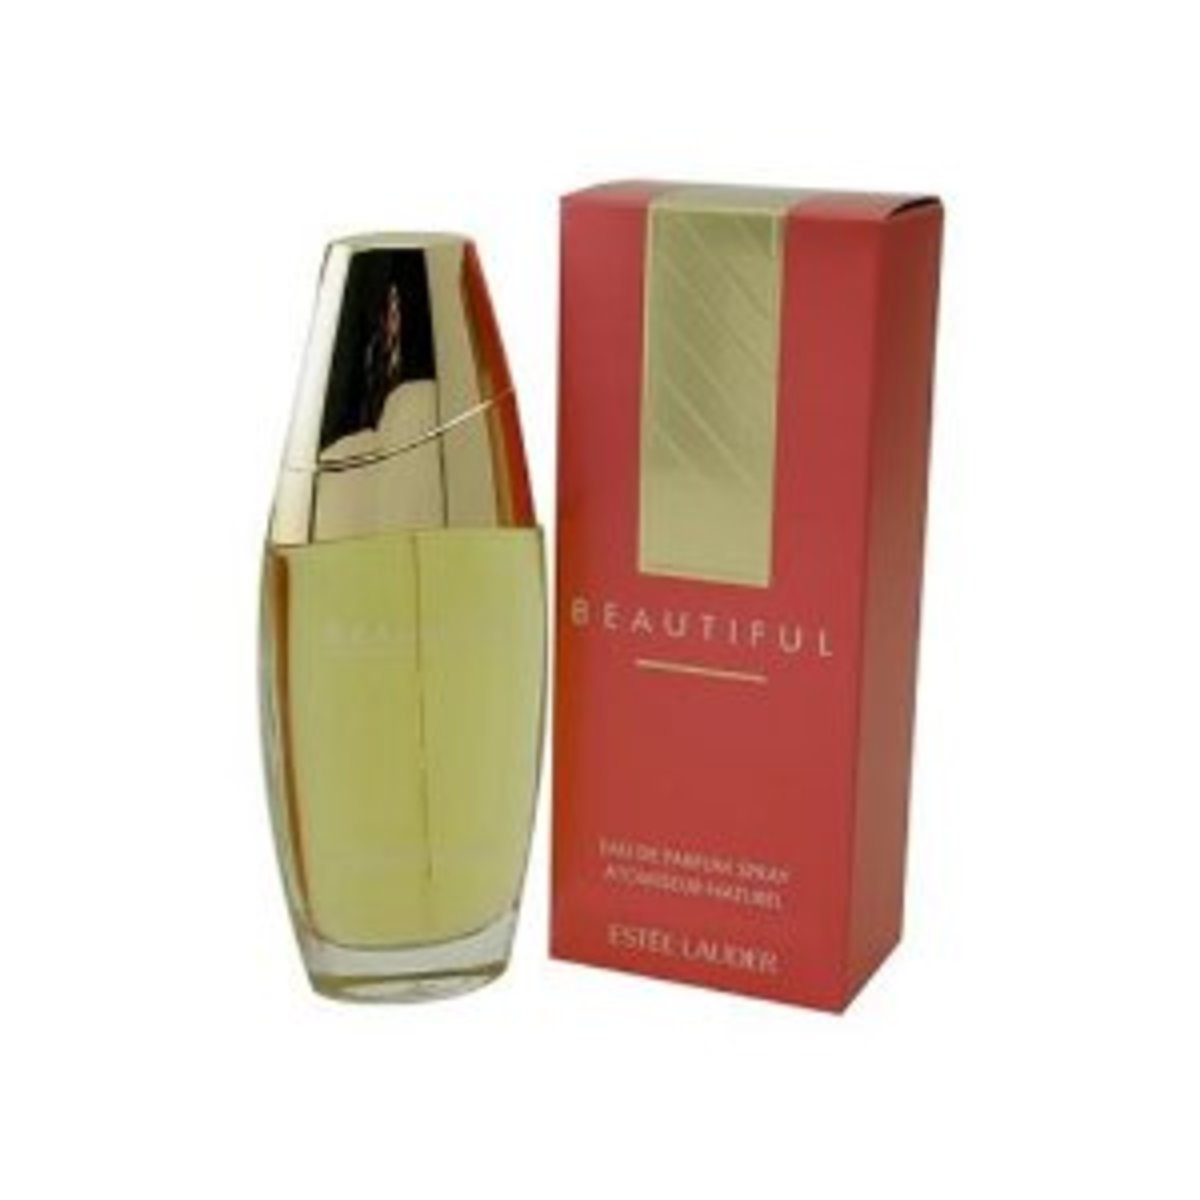 One of the classic perfumes for women - Beautiful by Estee Lauder